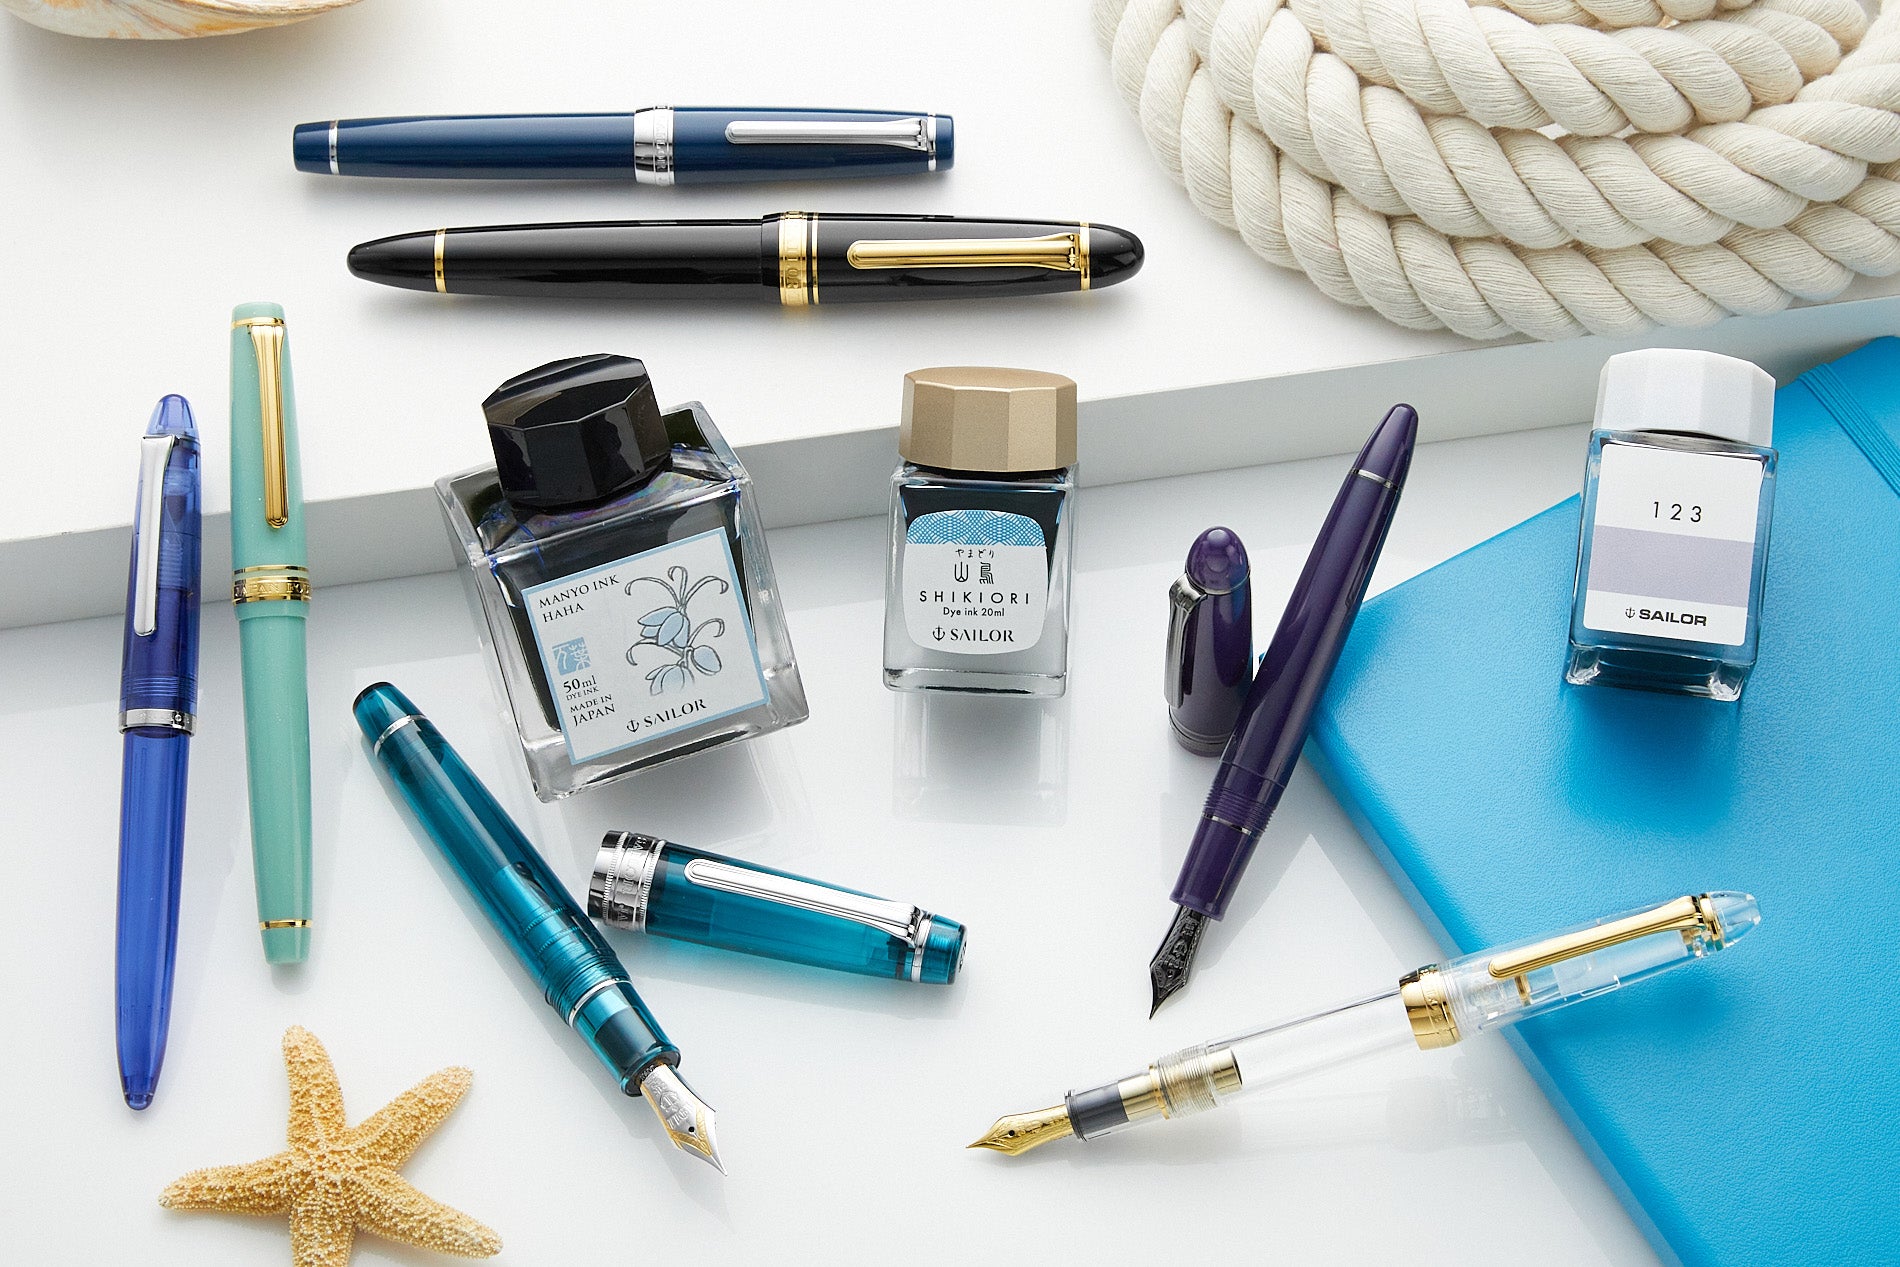 Best Selling Fountain Pens at Every Price Point - The Goulet Pen